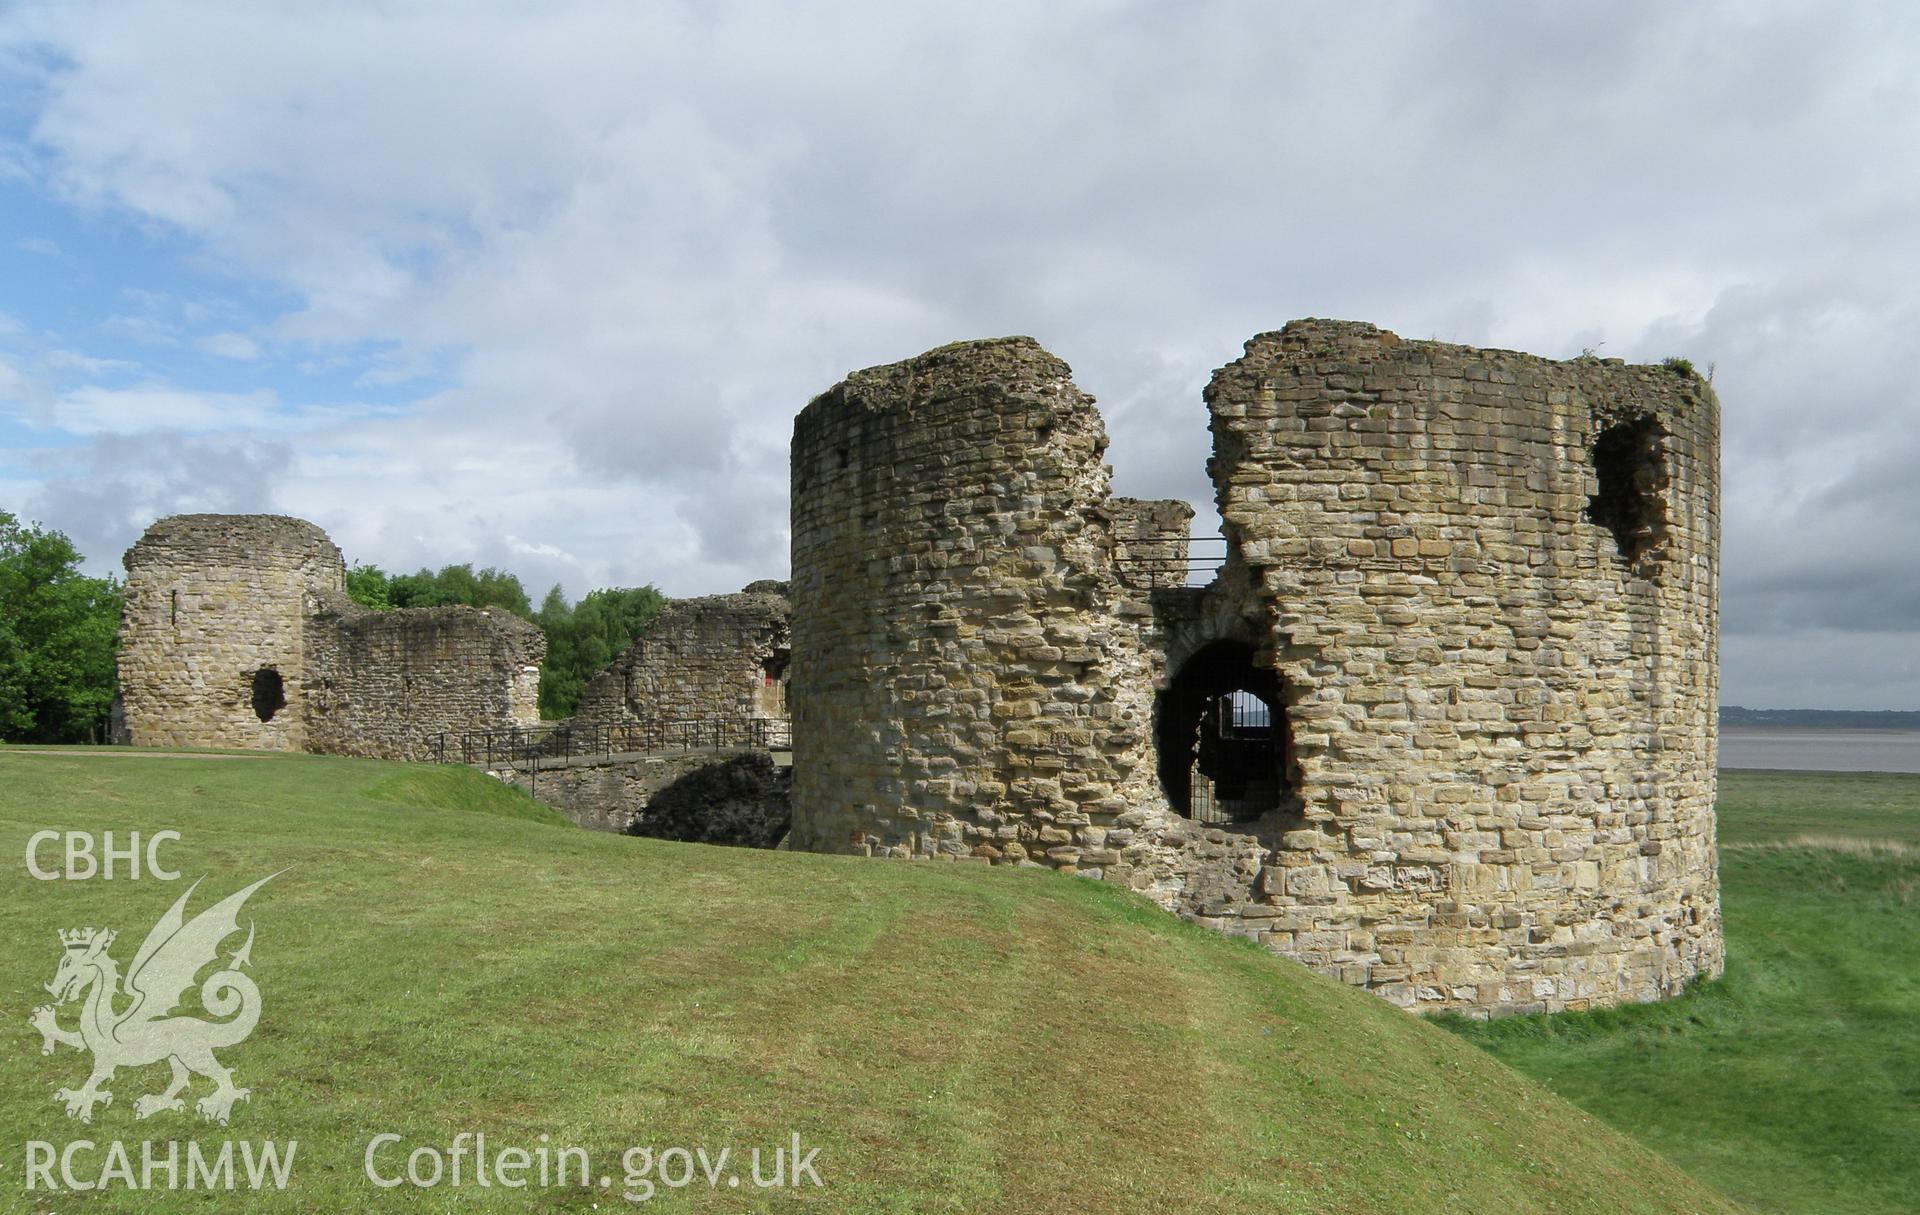 Colour photo showing Flint Castle, produced by Paul R. Davis, 9th May 2014.